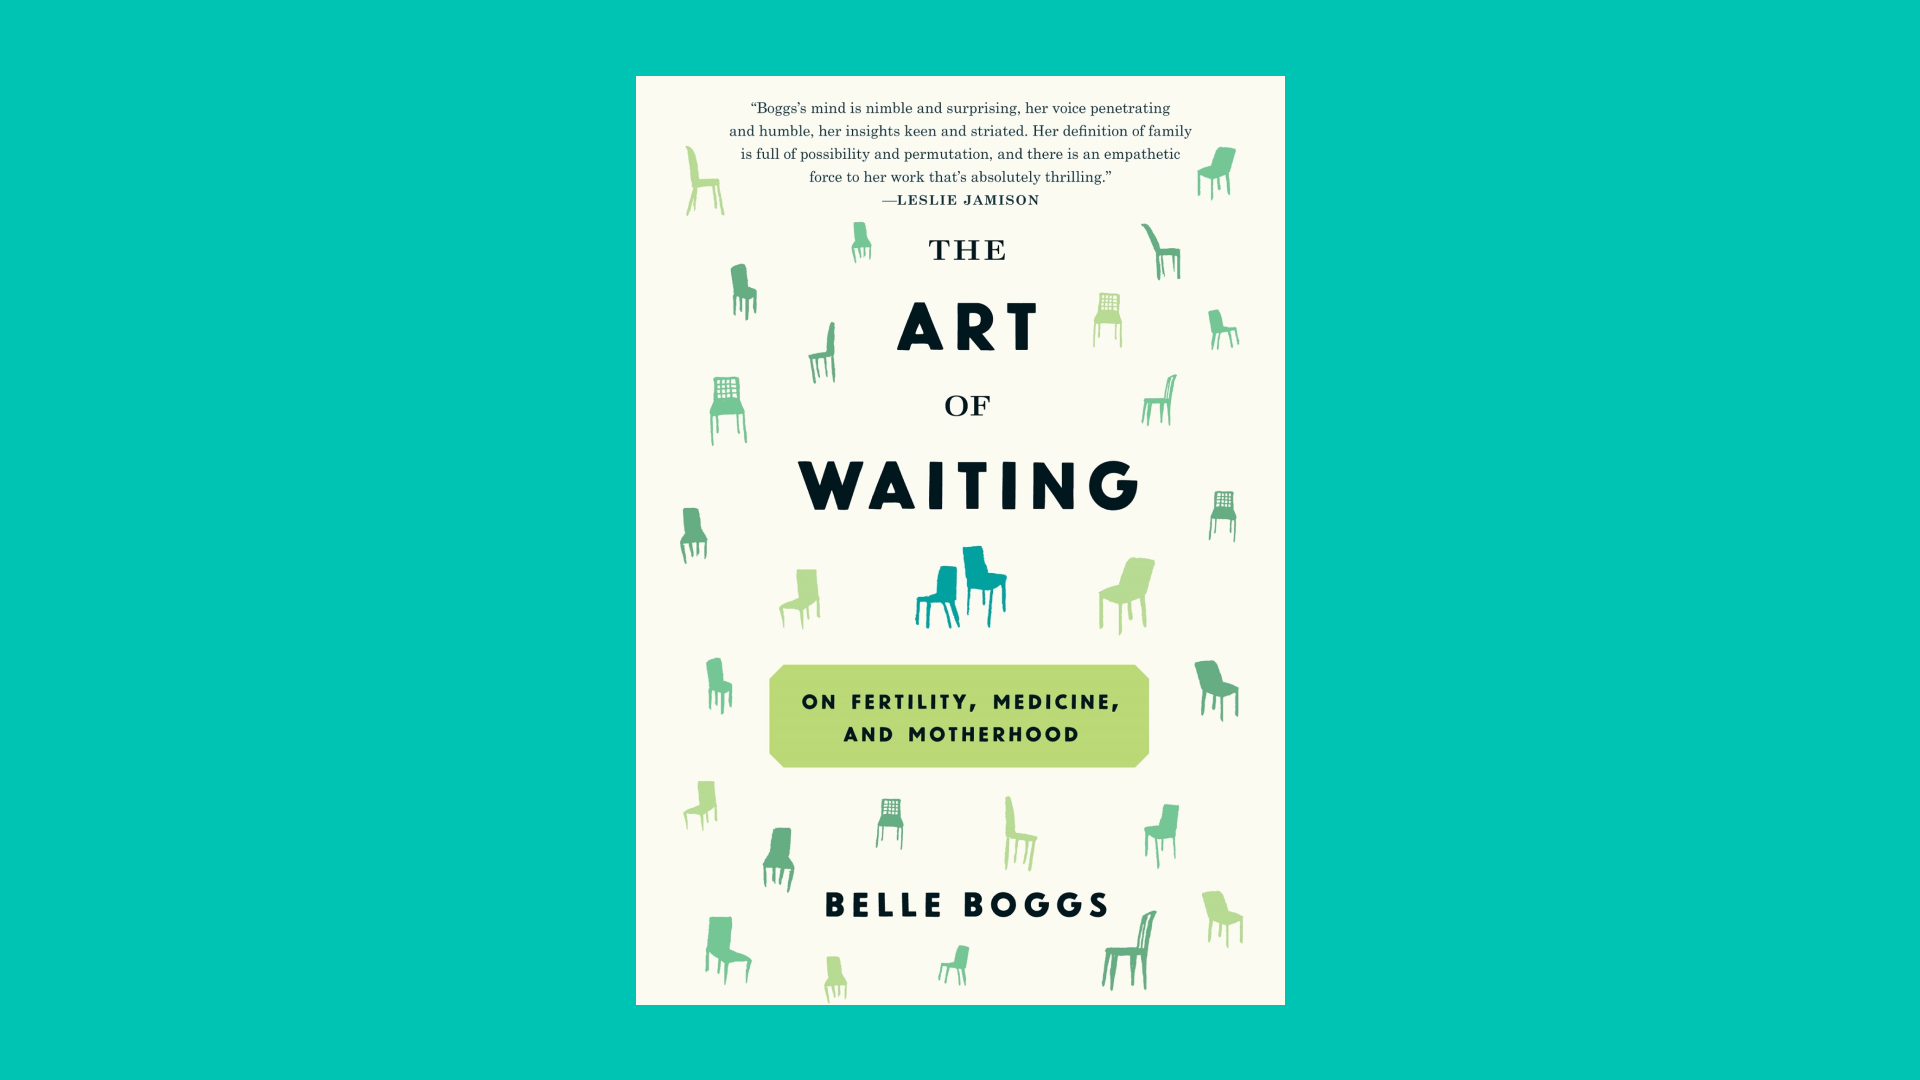 “The Art of Waiting” by Belle Boggs 